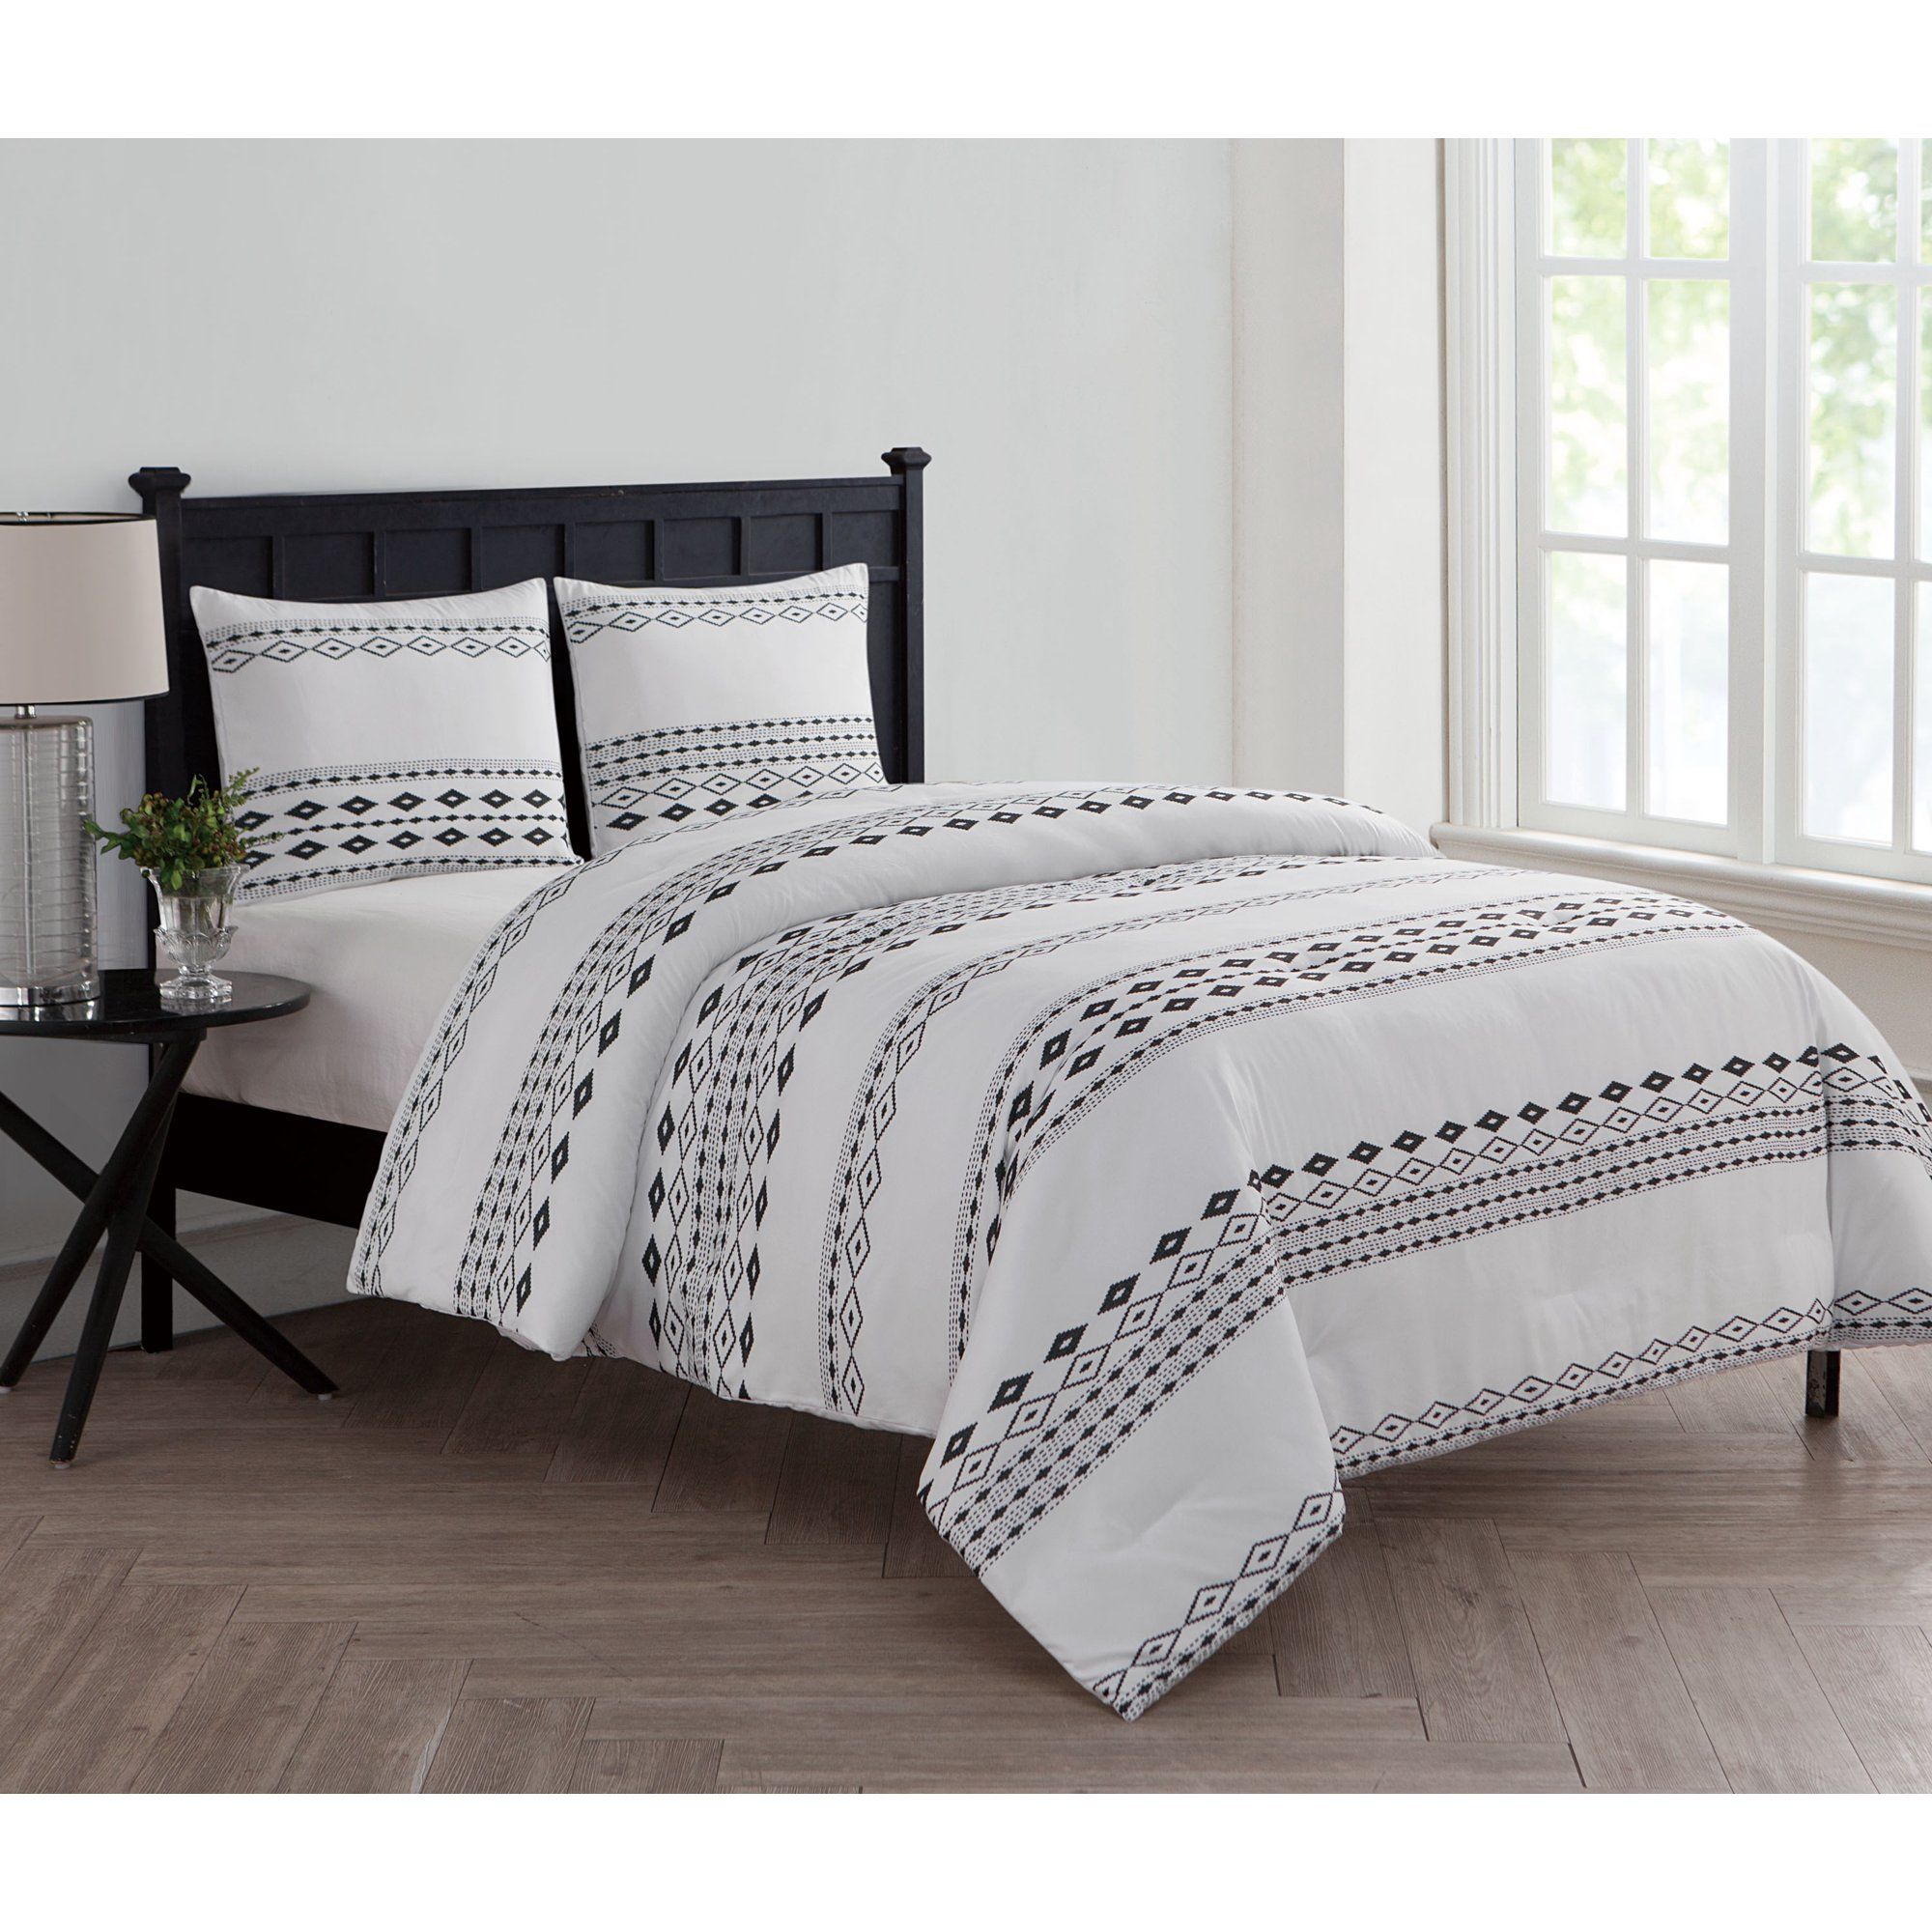 VCNY Home Black / White Aztec Printed 2/3 Piece Bedding Comforter Set with Shams Included | Walmart (US)